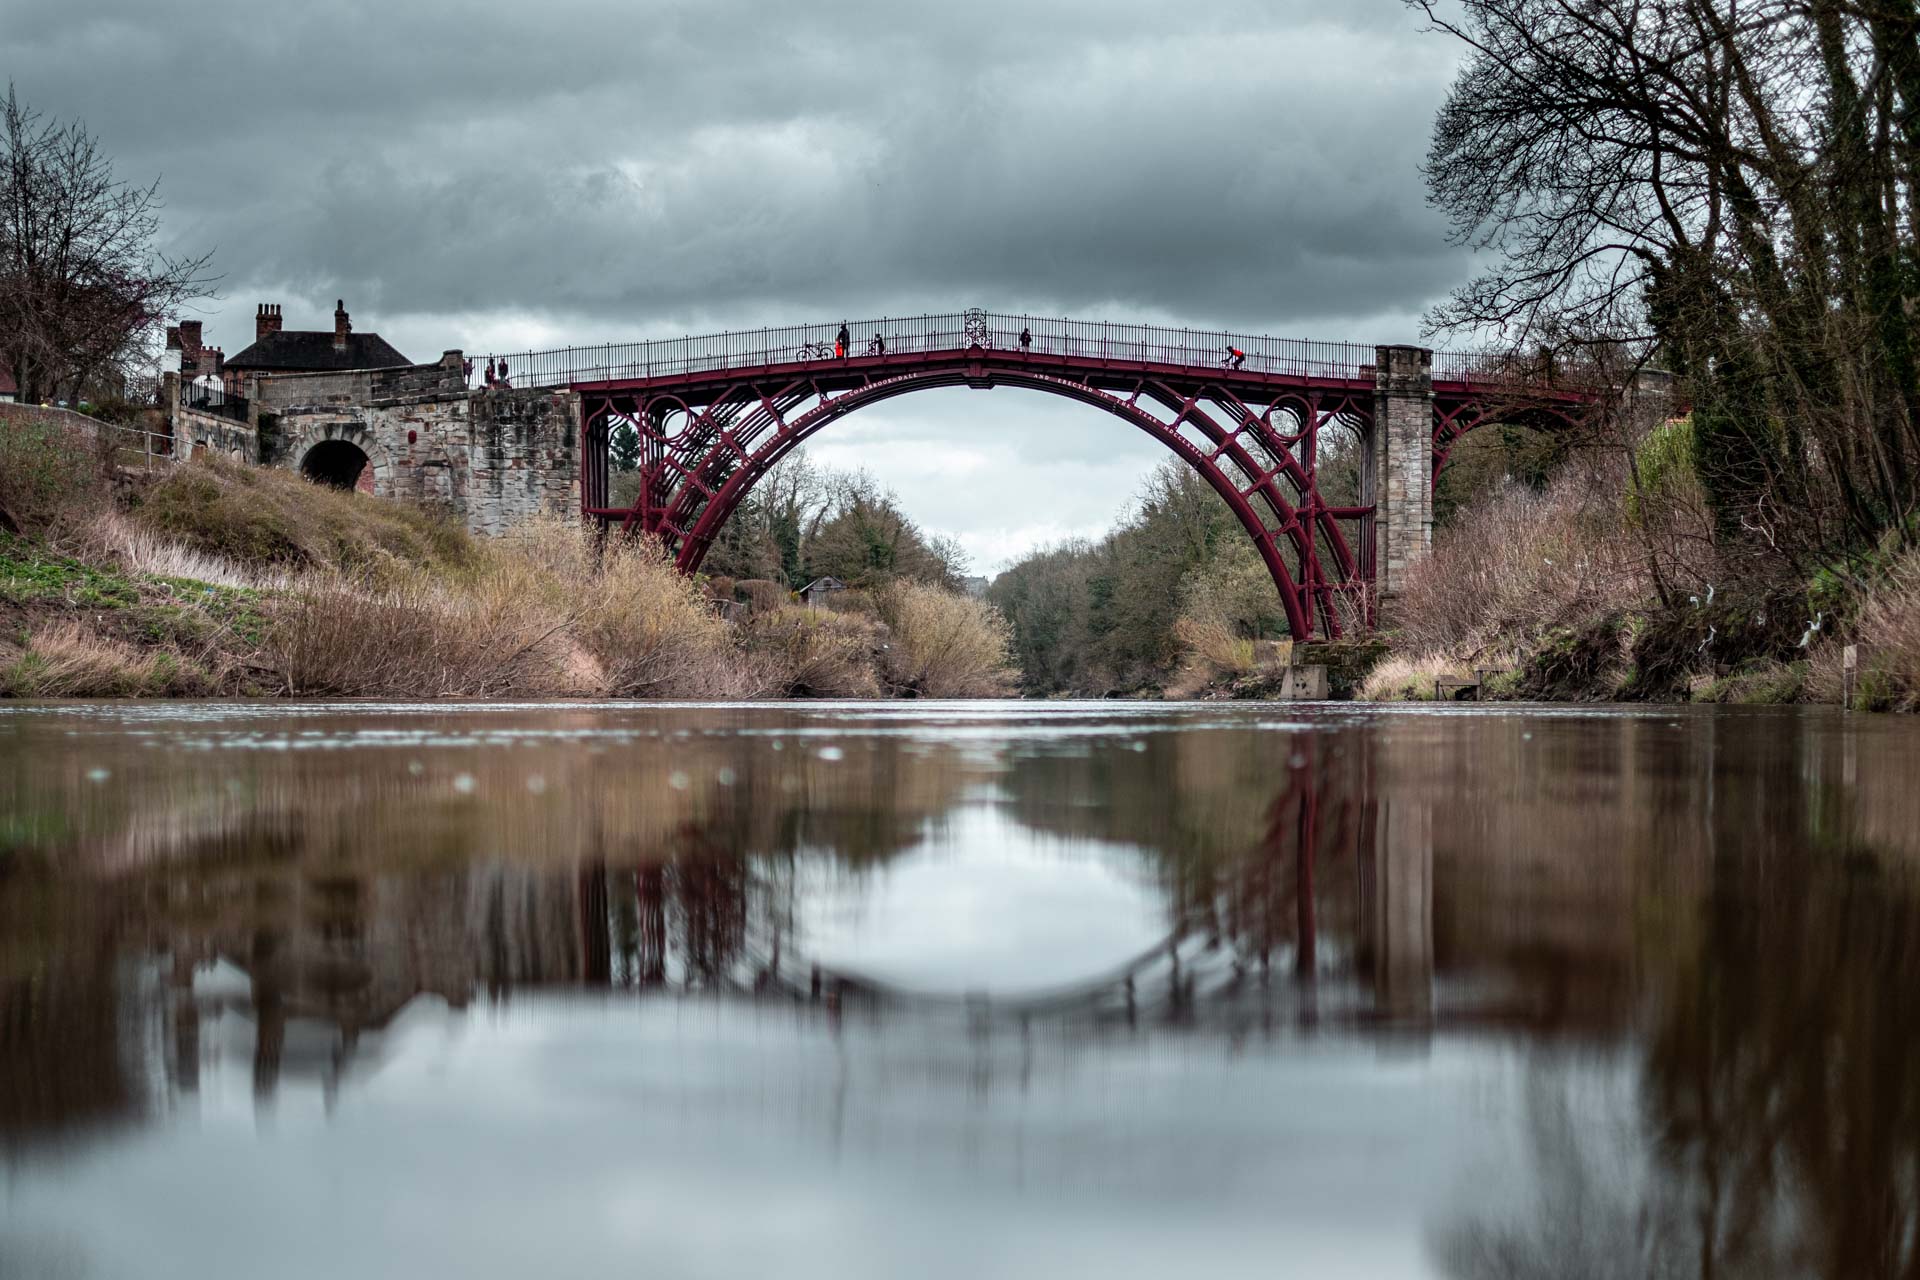 The remarkable Iron Bridge spanning over the River Severn in Shropshire.

Things to Do in Ironbridge Gorge, Shropshire